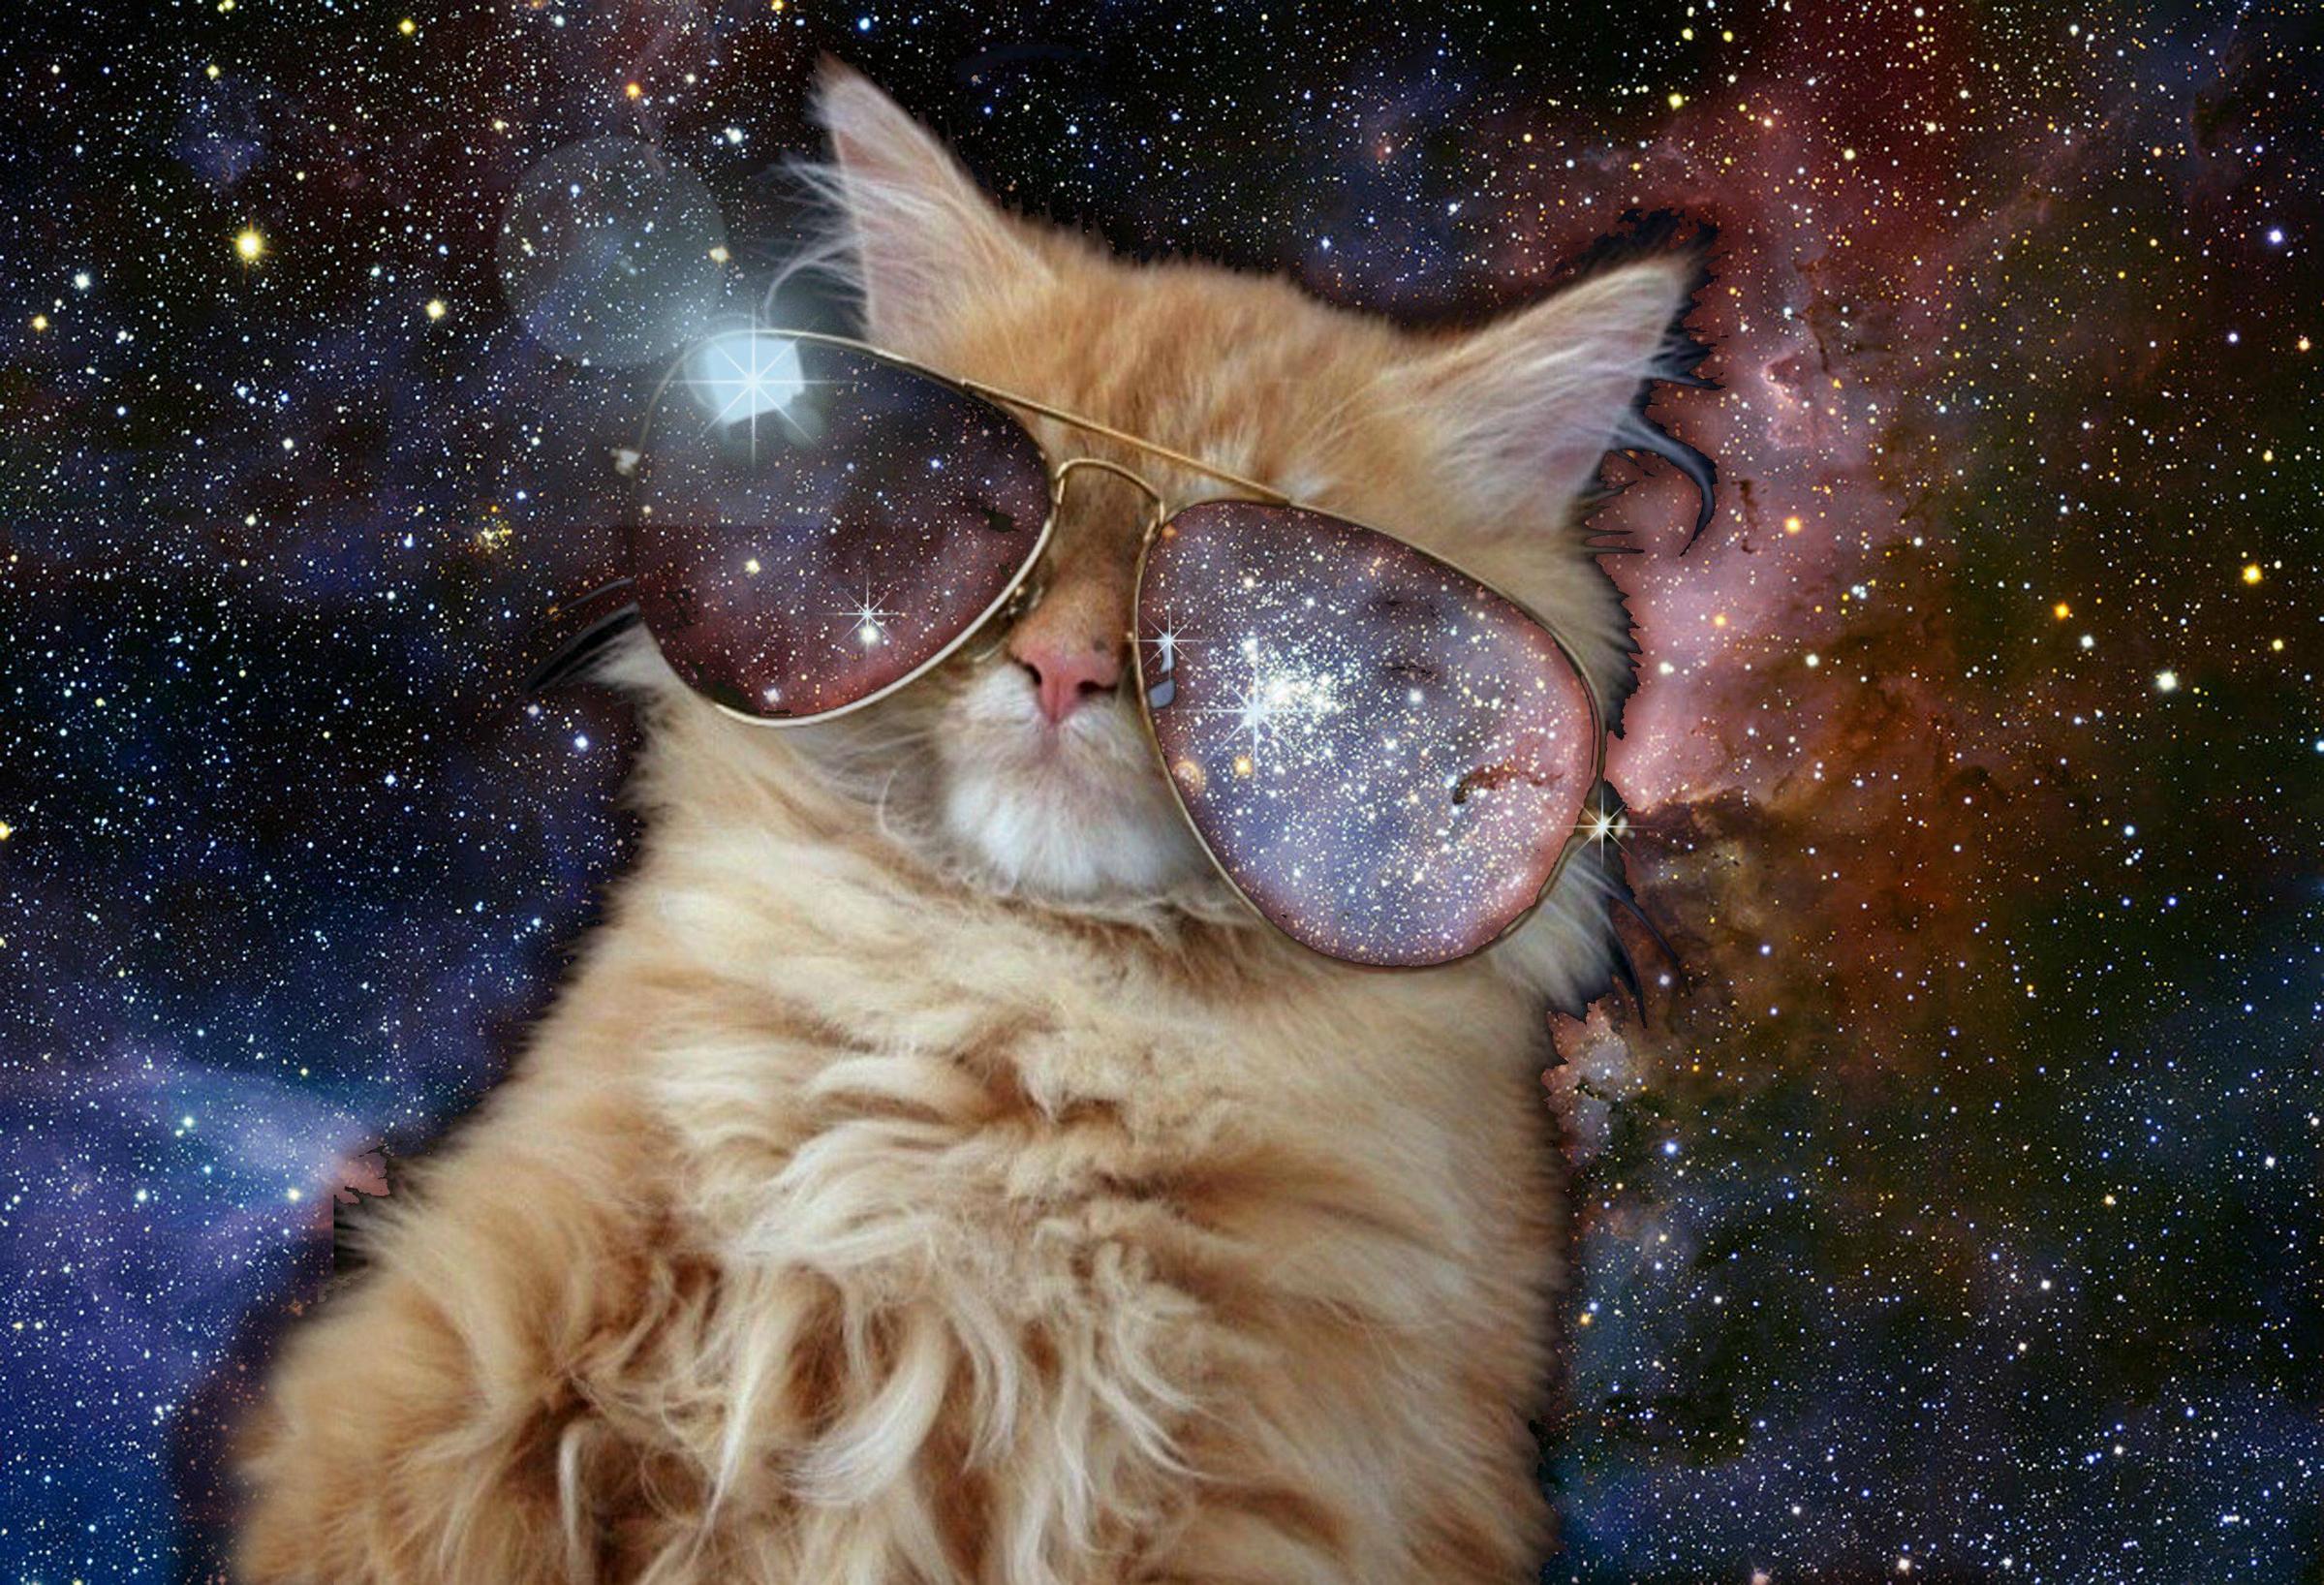  Awesome Cats In Space Wallpapers   Caveman Circus Caveman Circus